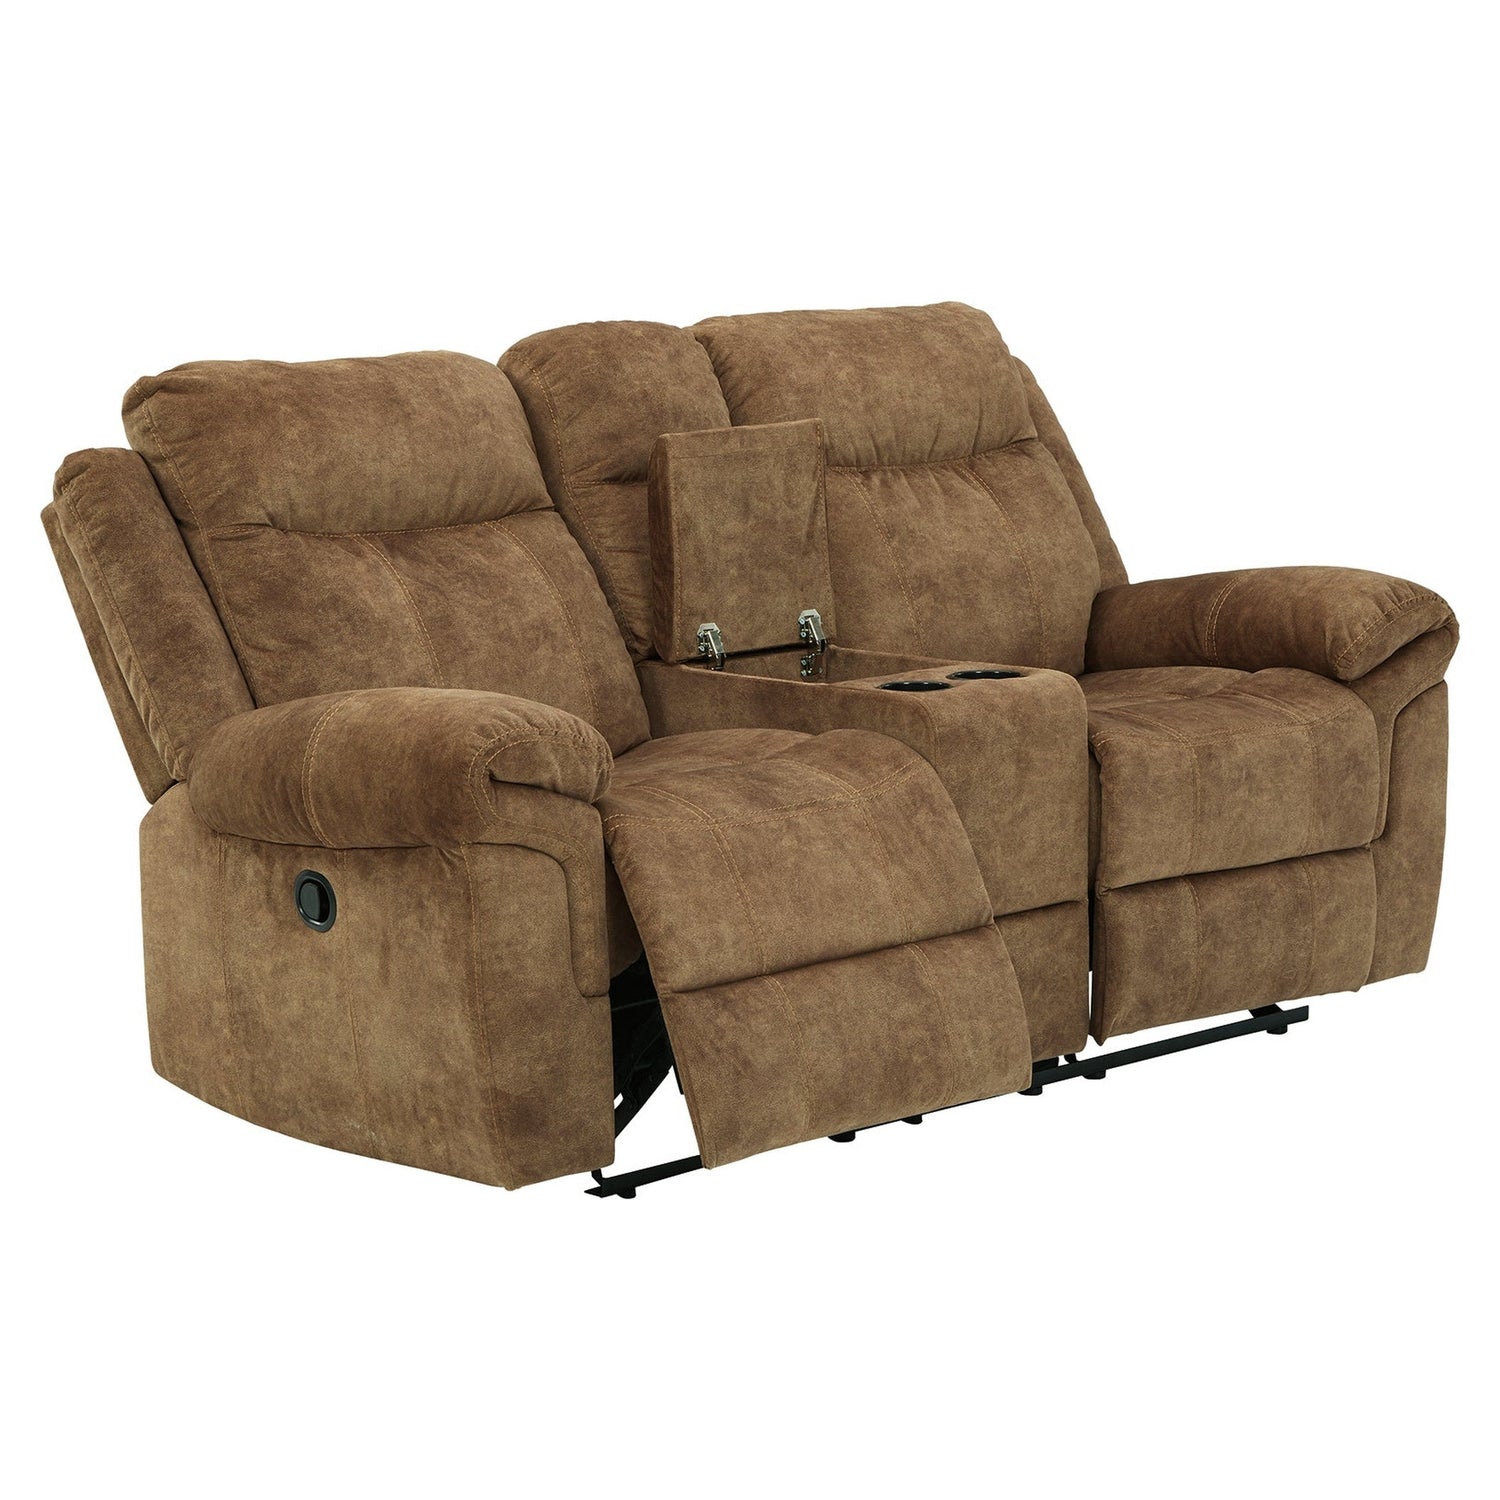 Huddle-Up Glider Reclining Loveseat with Console Ash-8230494